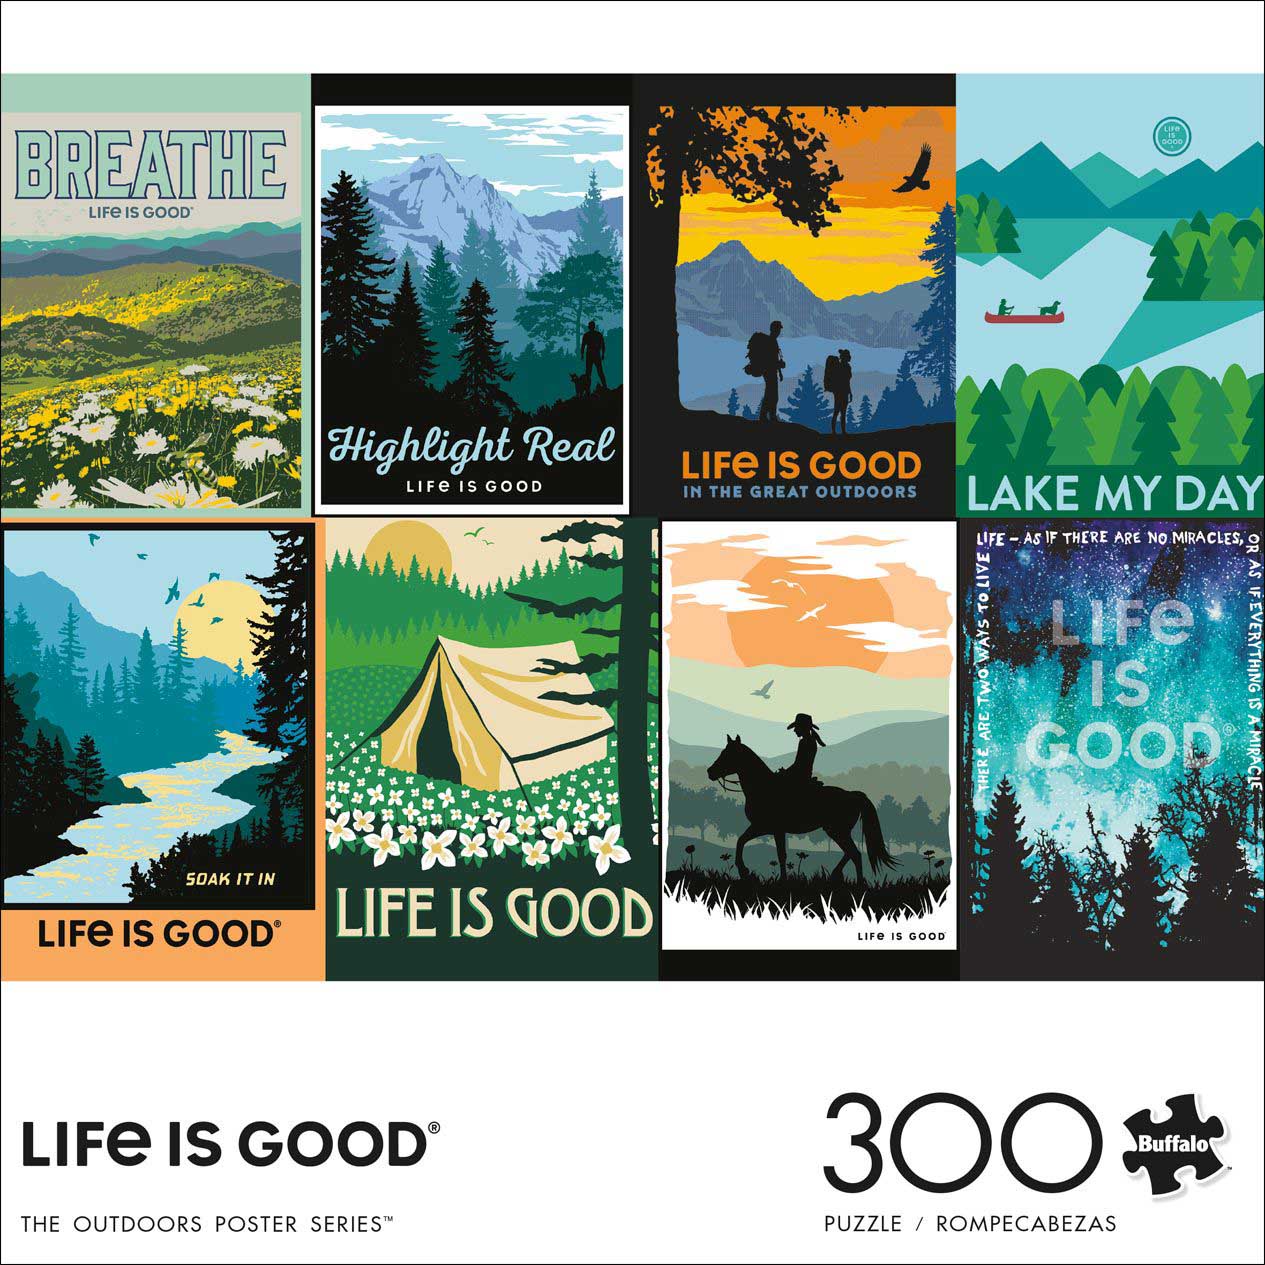 The Outdoors Poster Series